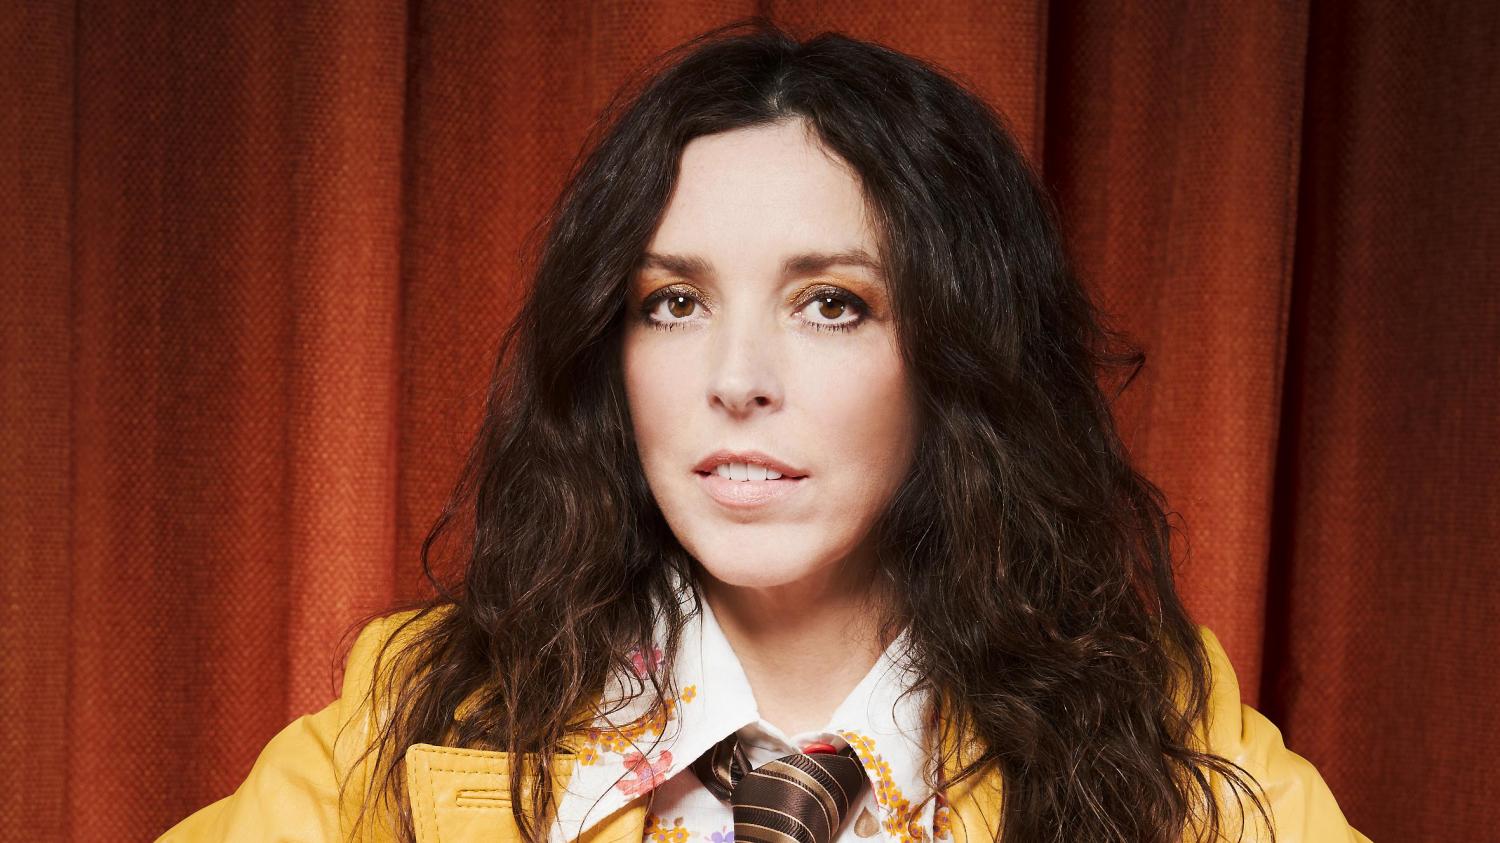 Bridget Christie Who Am I On Tour Now Comedian Bridget Christie On Her Tv Breakthrough And